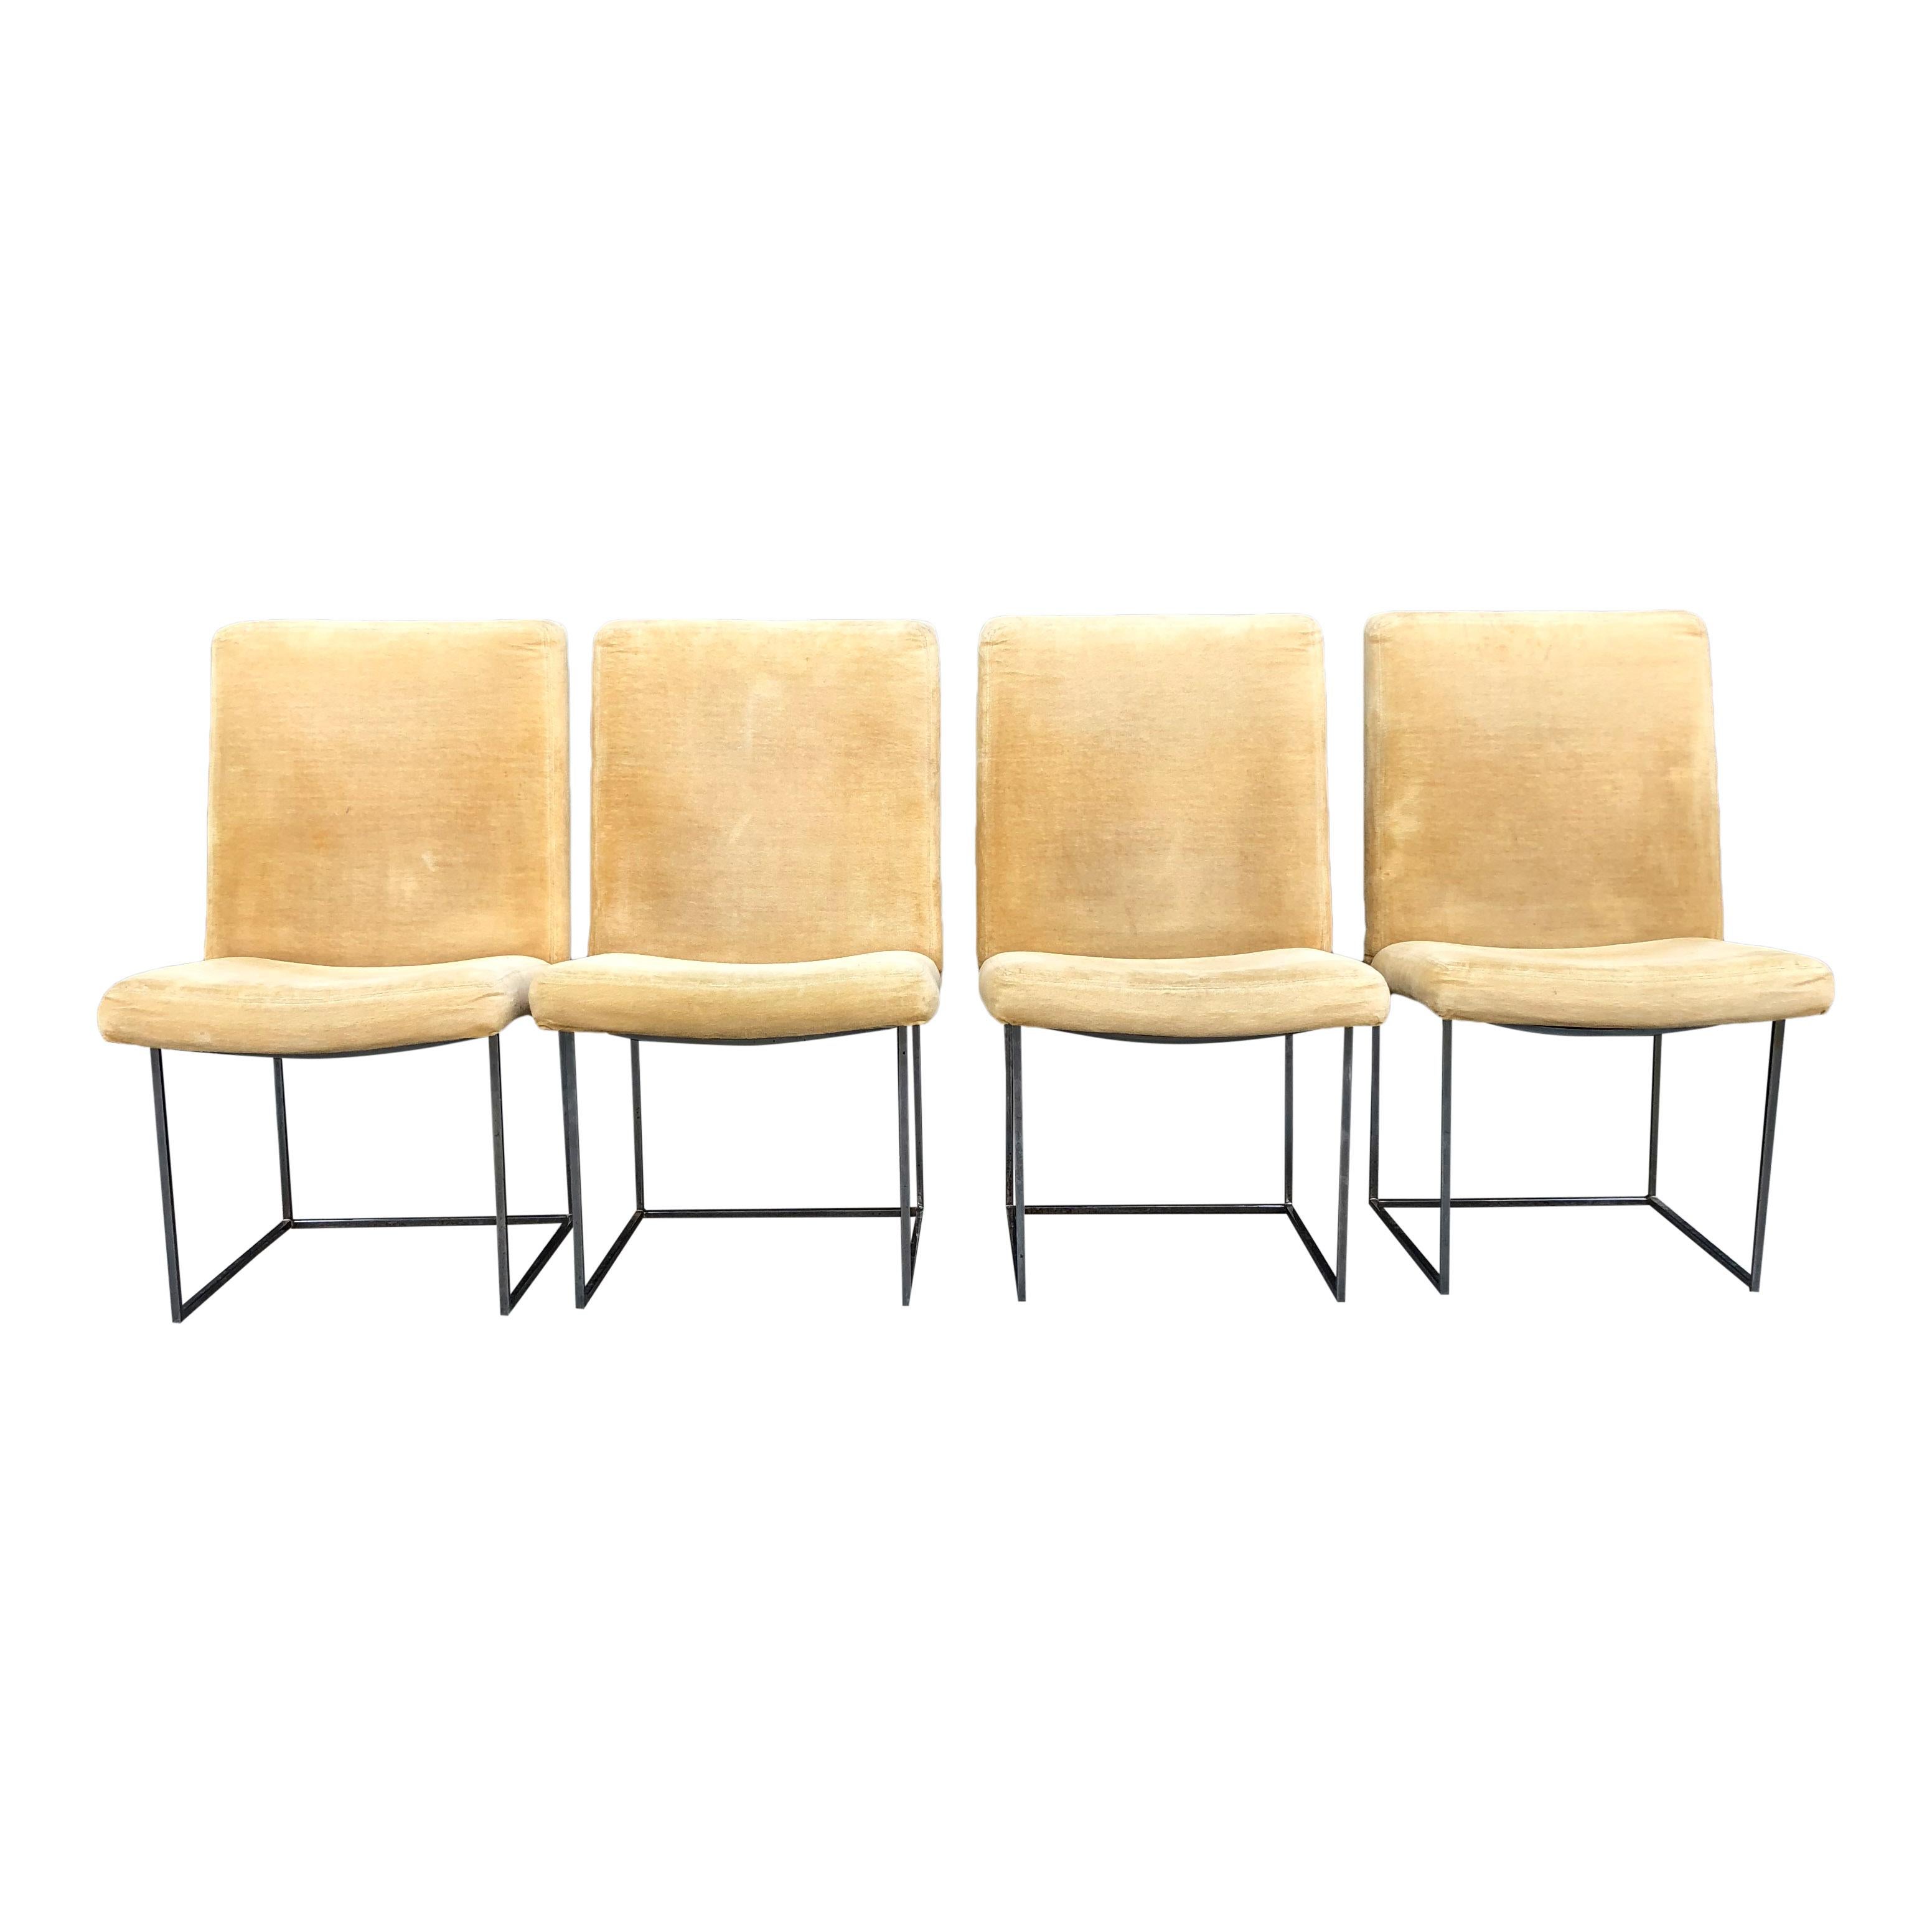 Four Milo Baughman for Thayer Coggin Thin Bronze Dining Chairs